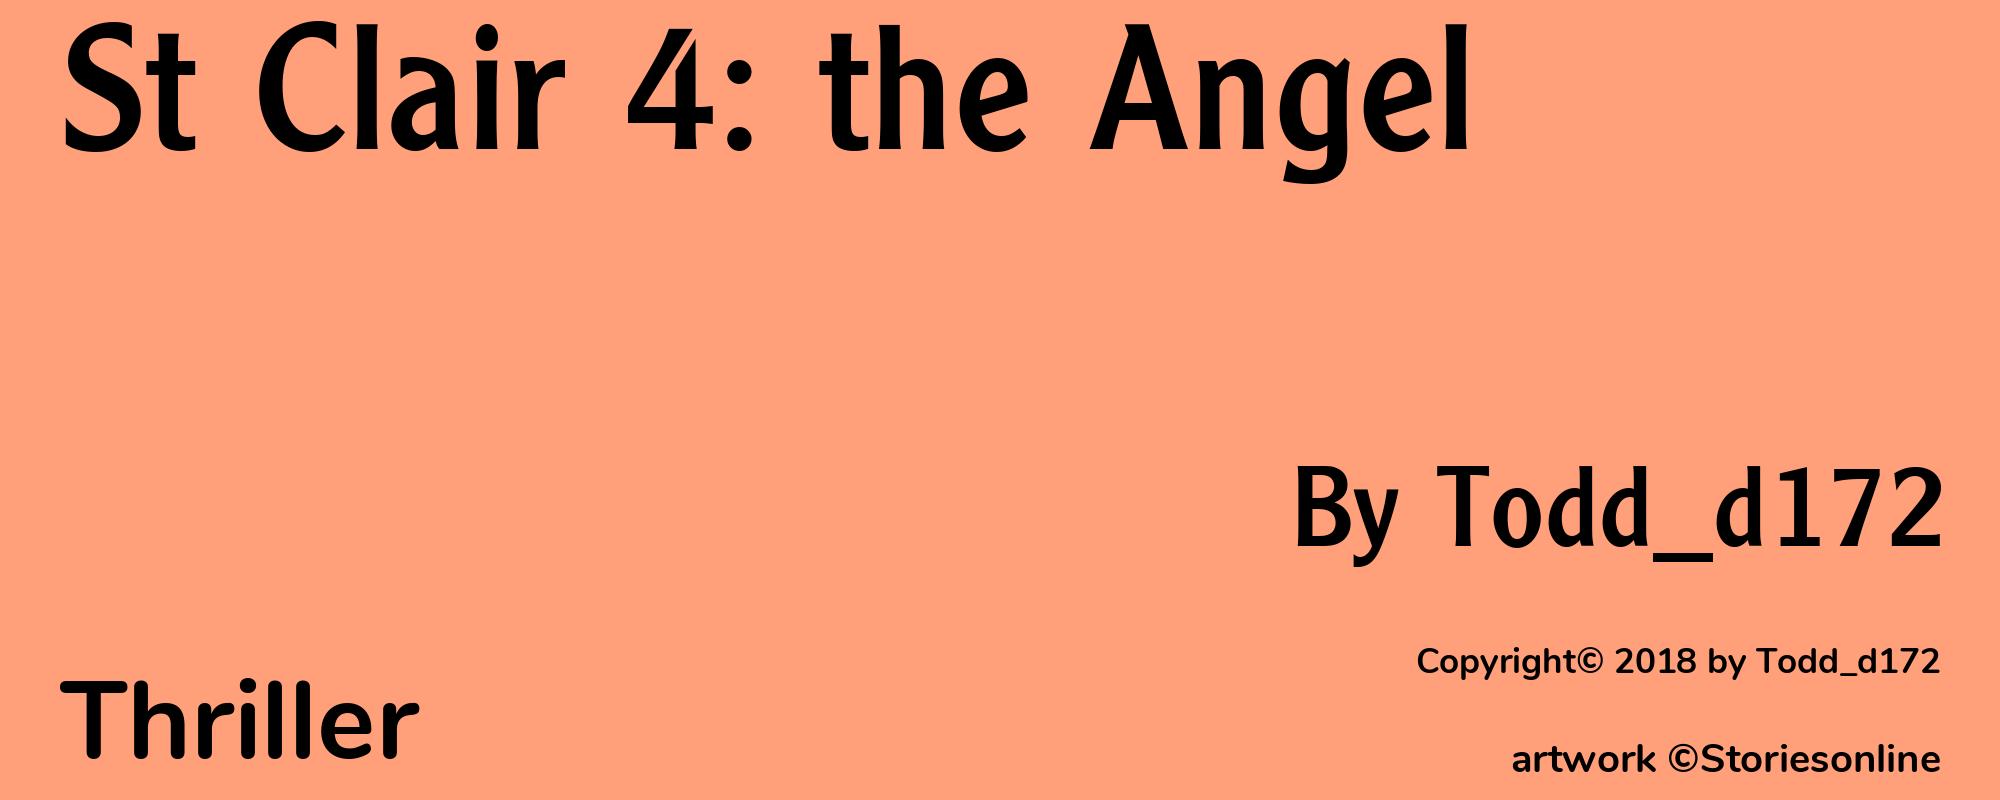 St Clair 4: the Angel - Cover